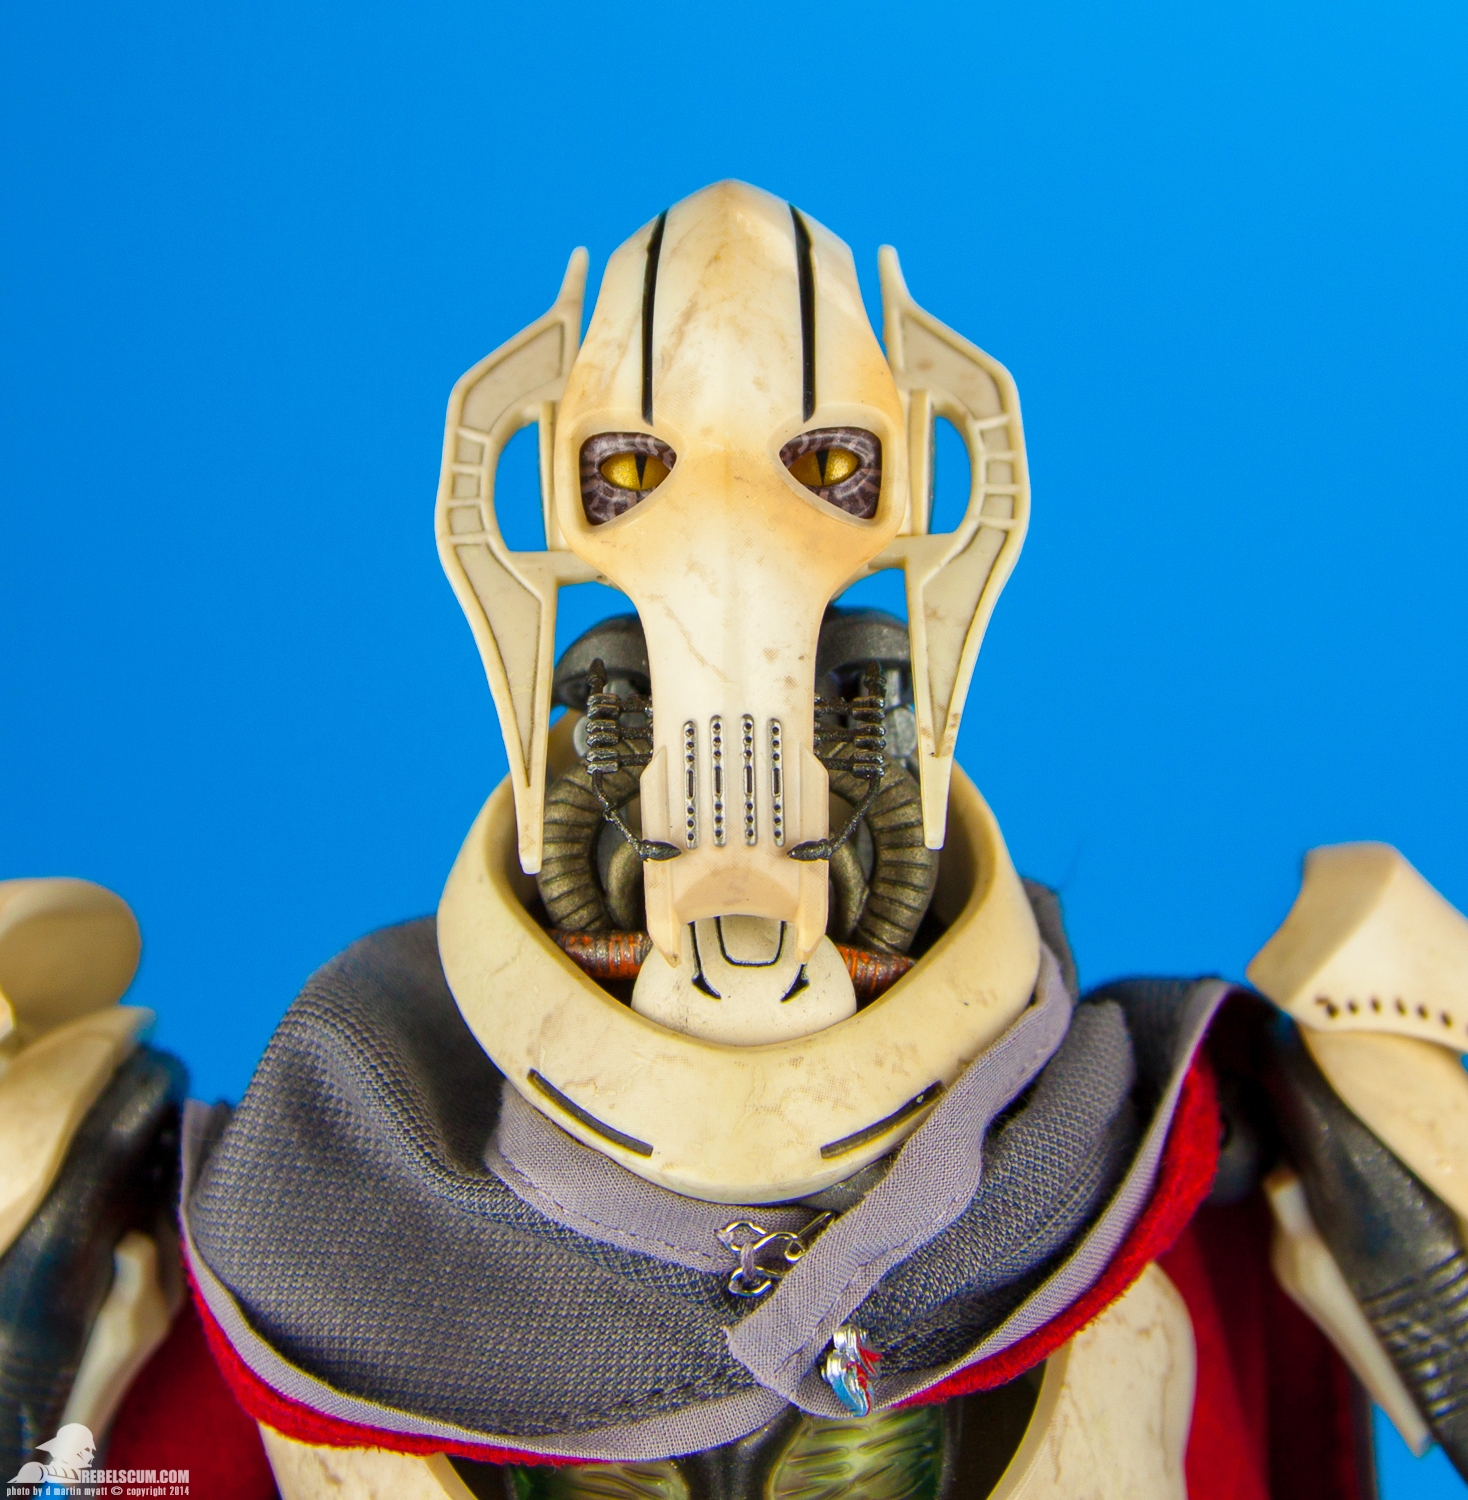 General-Grievous-Sixth-Scale-Figure-Sideshow-Collectibles-009.jpg